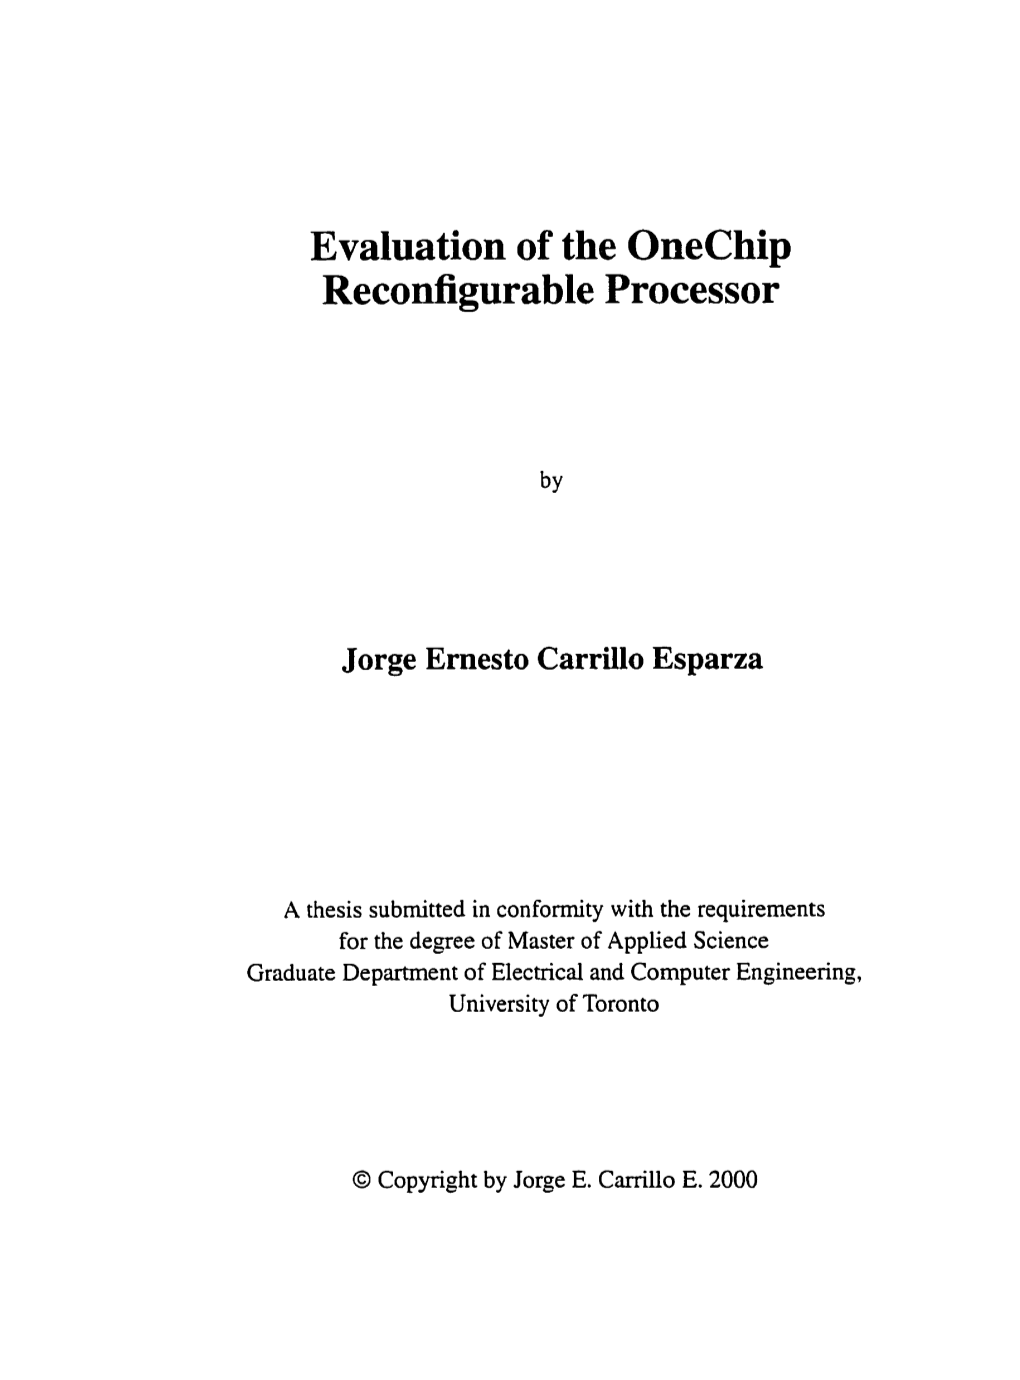 Evaluation of the Onechip Reconfigurable Processor